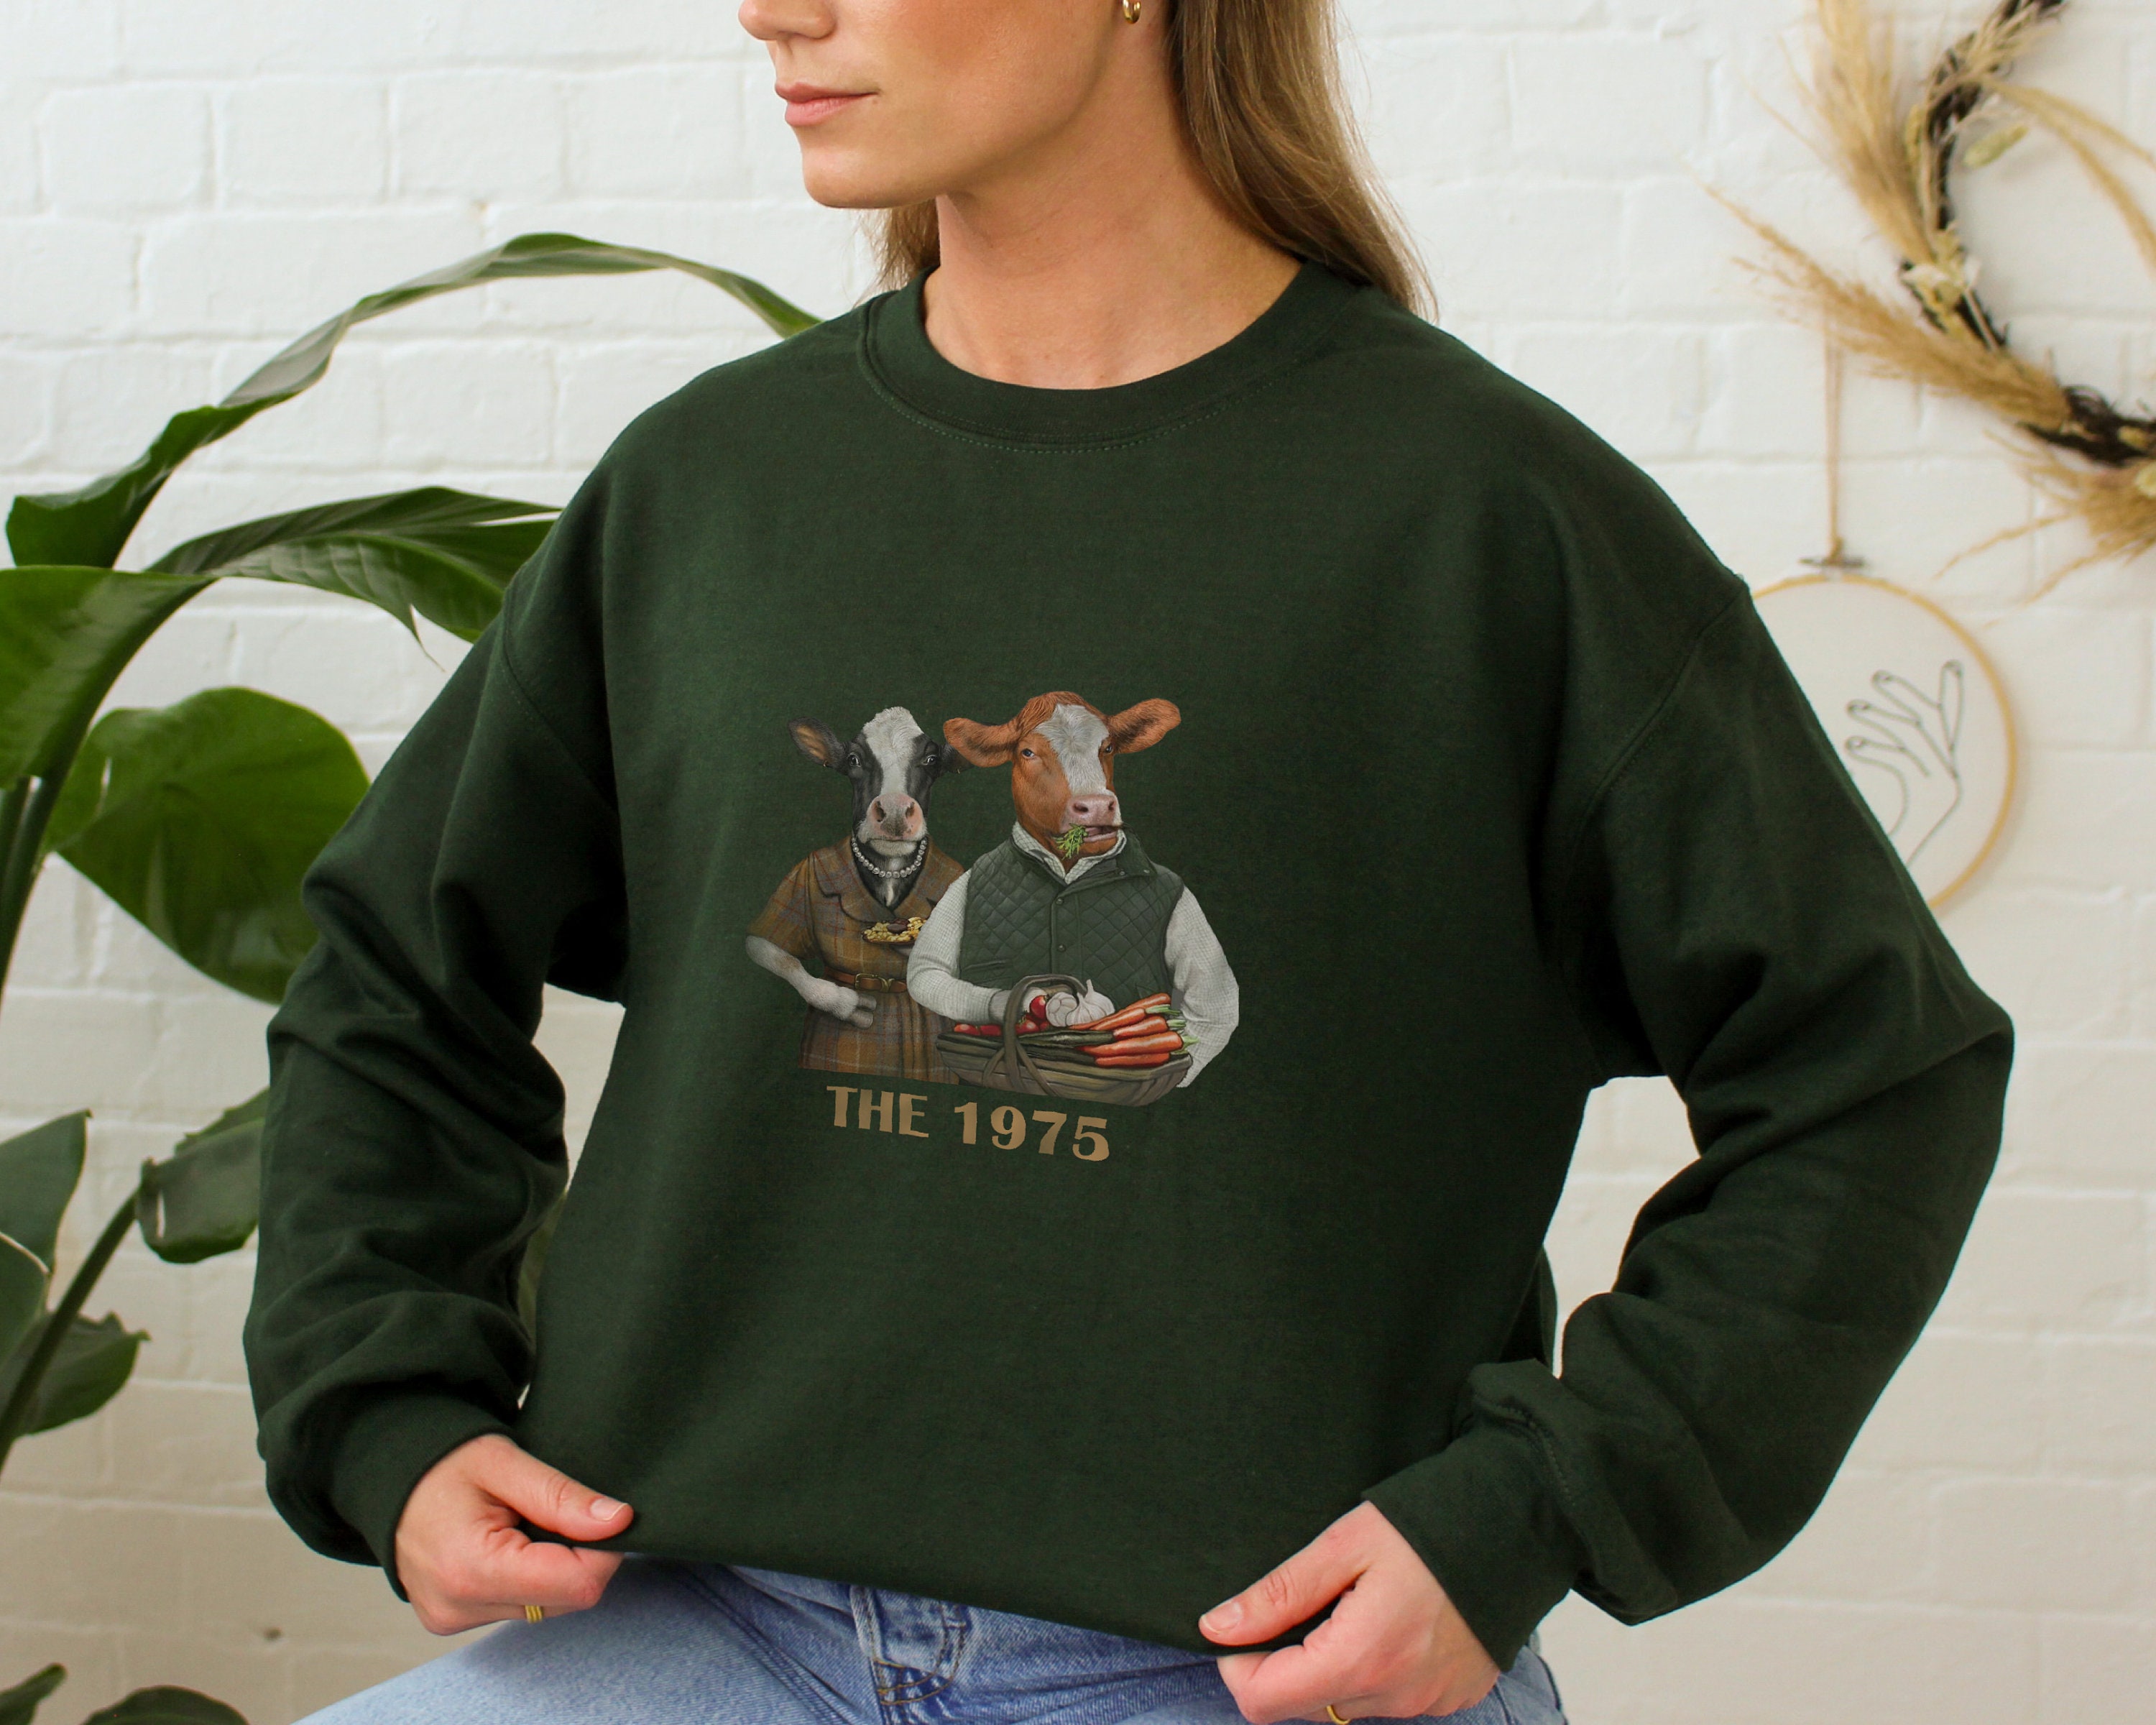 Discover Cow Wearing My Sweater The 1975, When We Are Together Sweatshirt